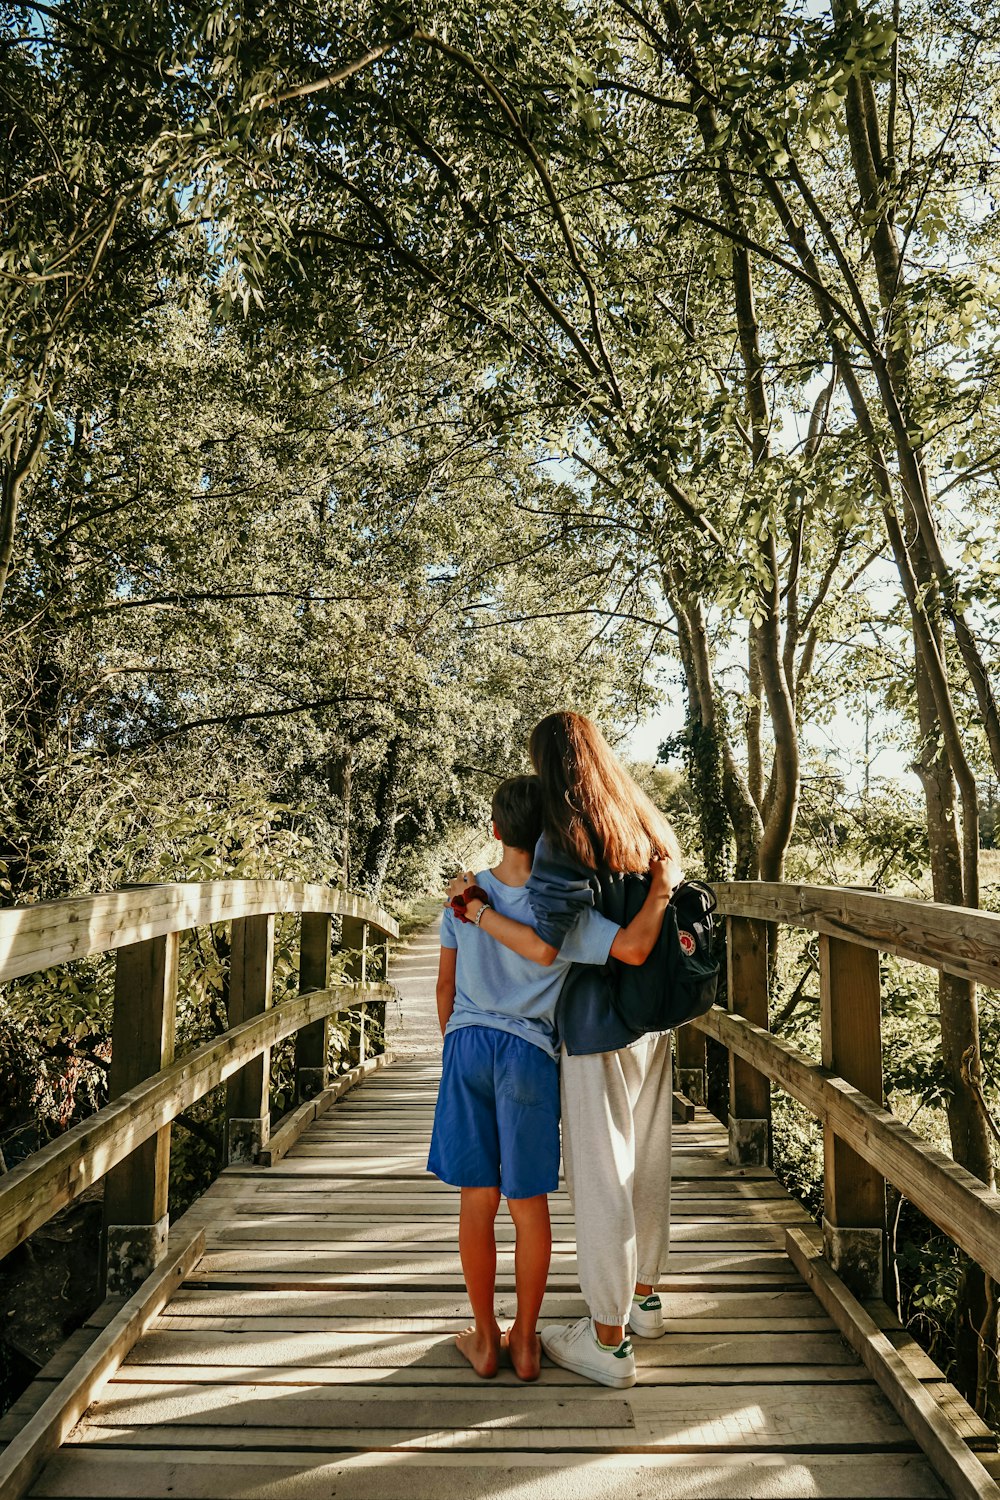 boy and woman standing on wooden bridge